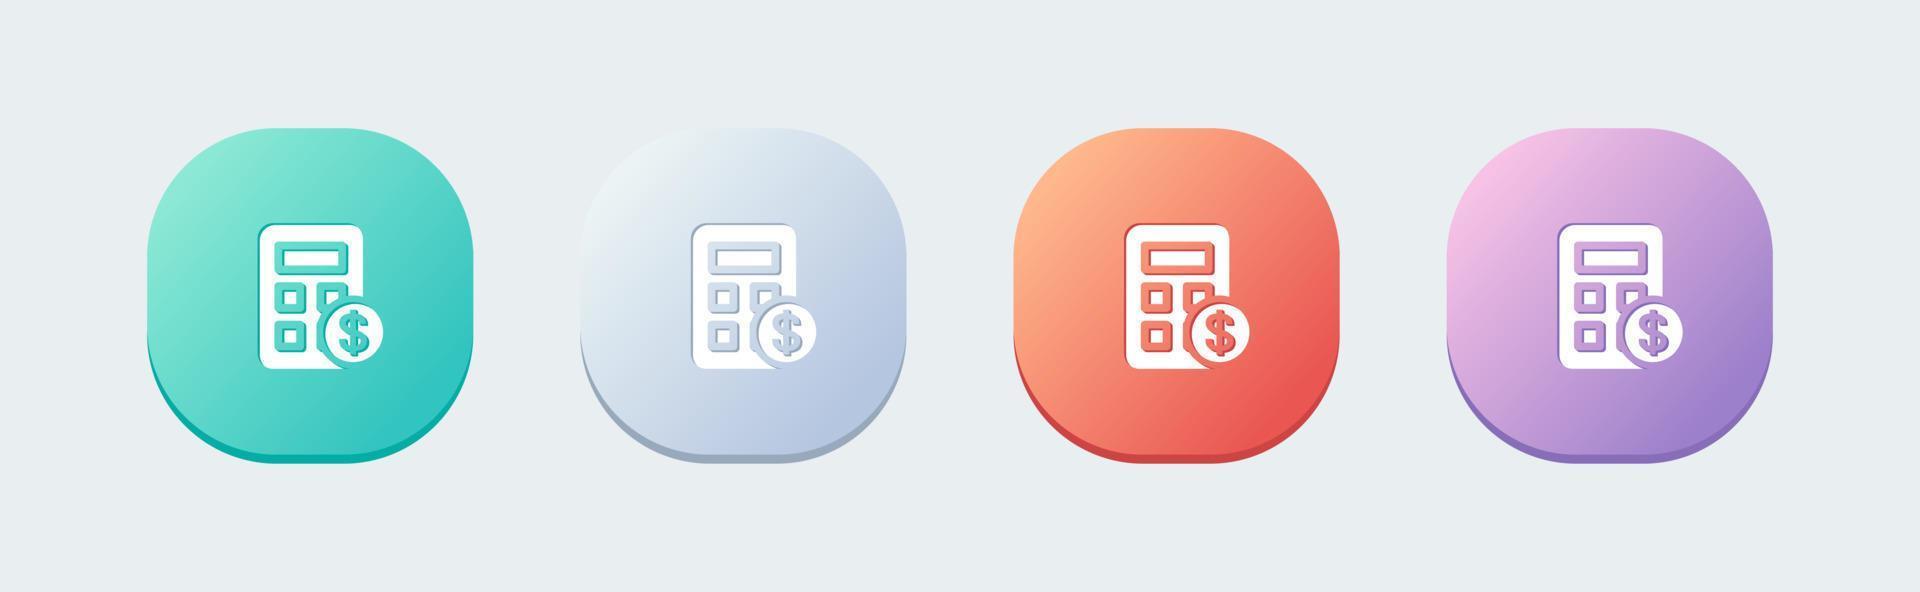 Calculator solid icon in flat design style. Finance signs vector illustration.